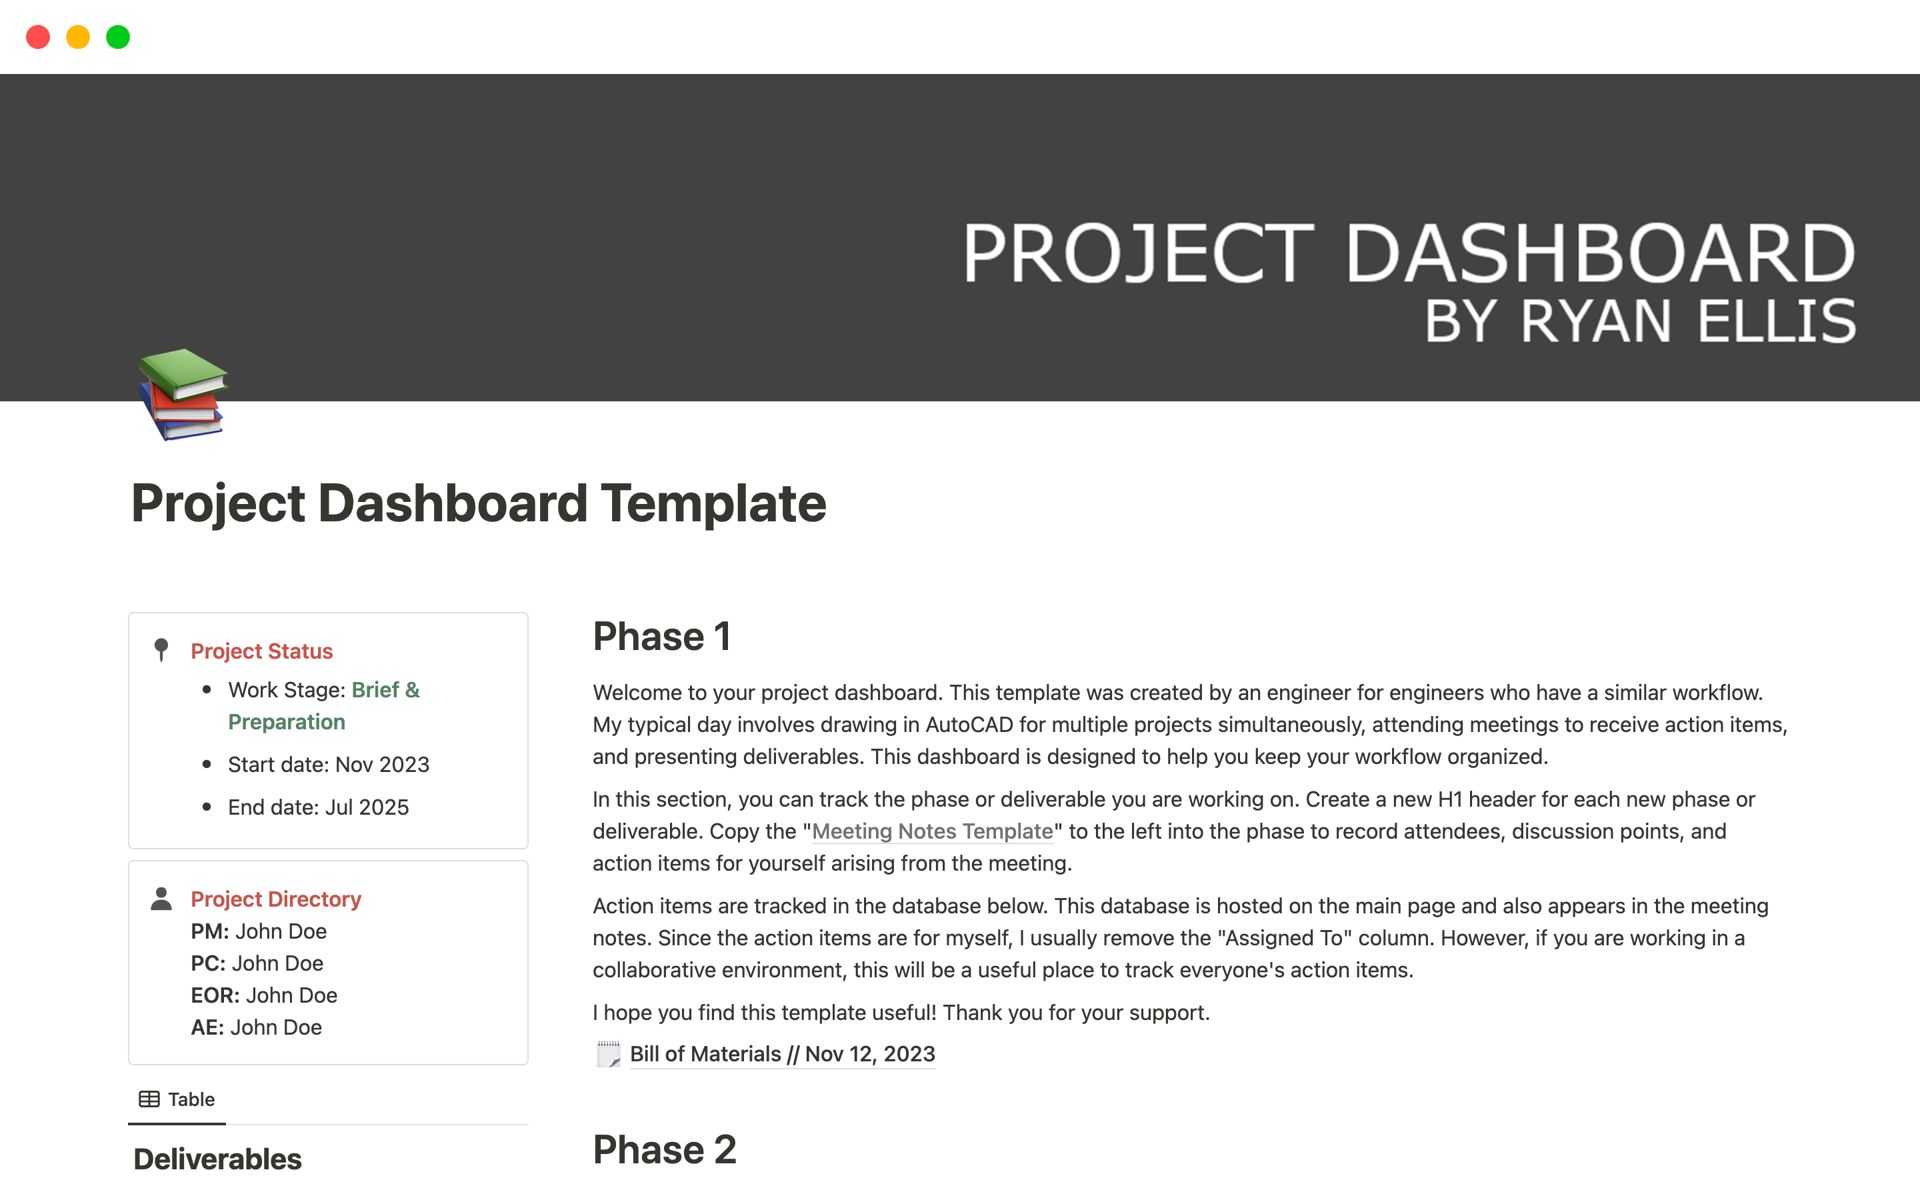 This template helps engineers keep track of tasks and notes throughout the life of their project. 